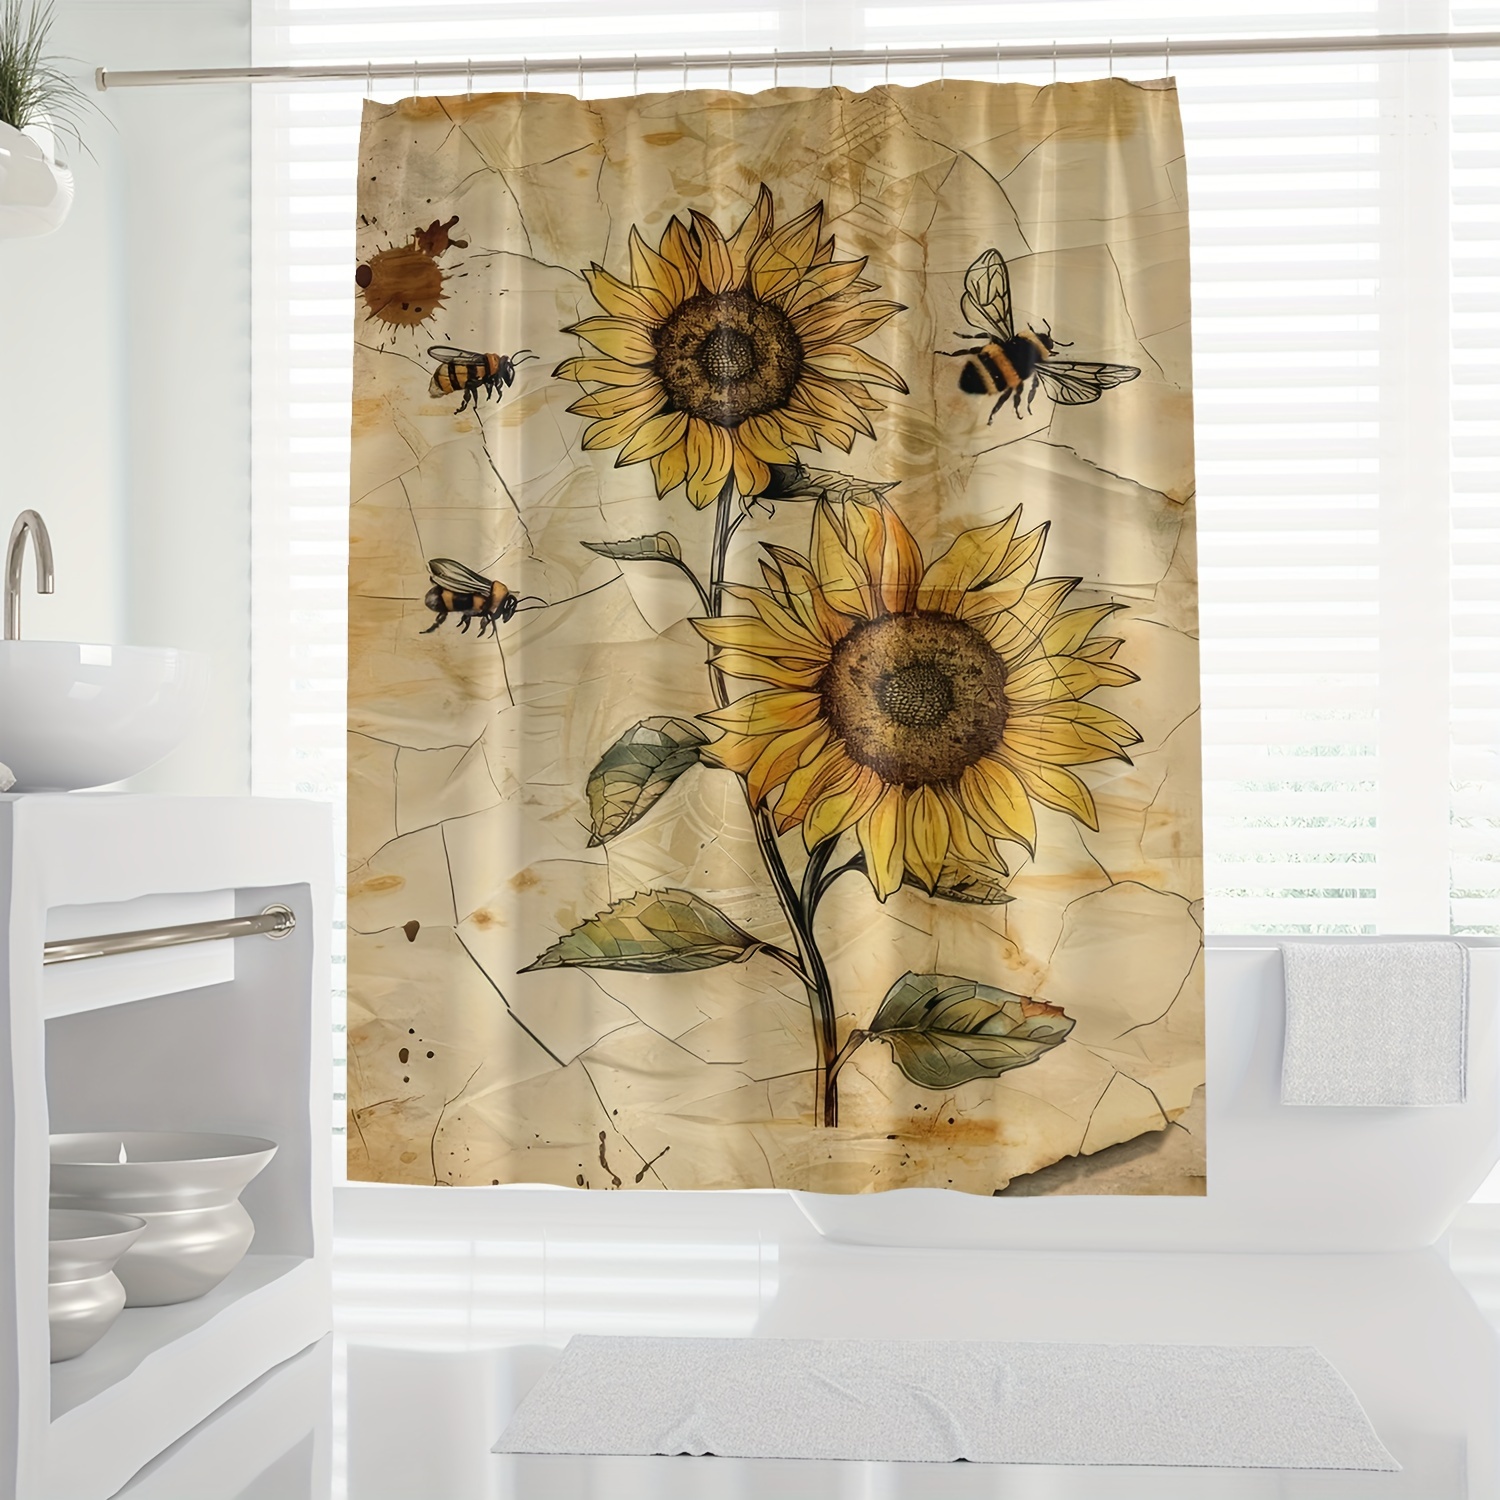 

Sunflower And Bee Digital Print Polyester Shower Curtain With Hooks, Water-resistant, Machine Washable, All-season, Knit Weave, Artistic Floral Pattern Design For Bathroom Decor